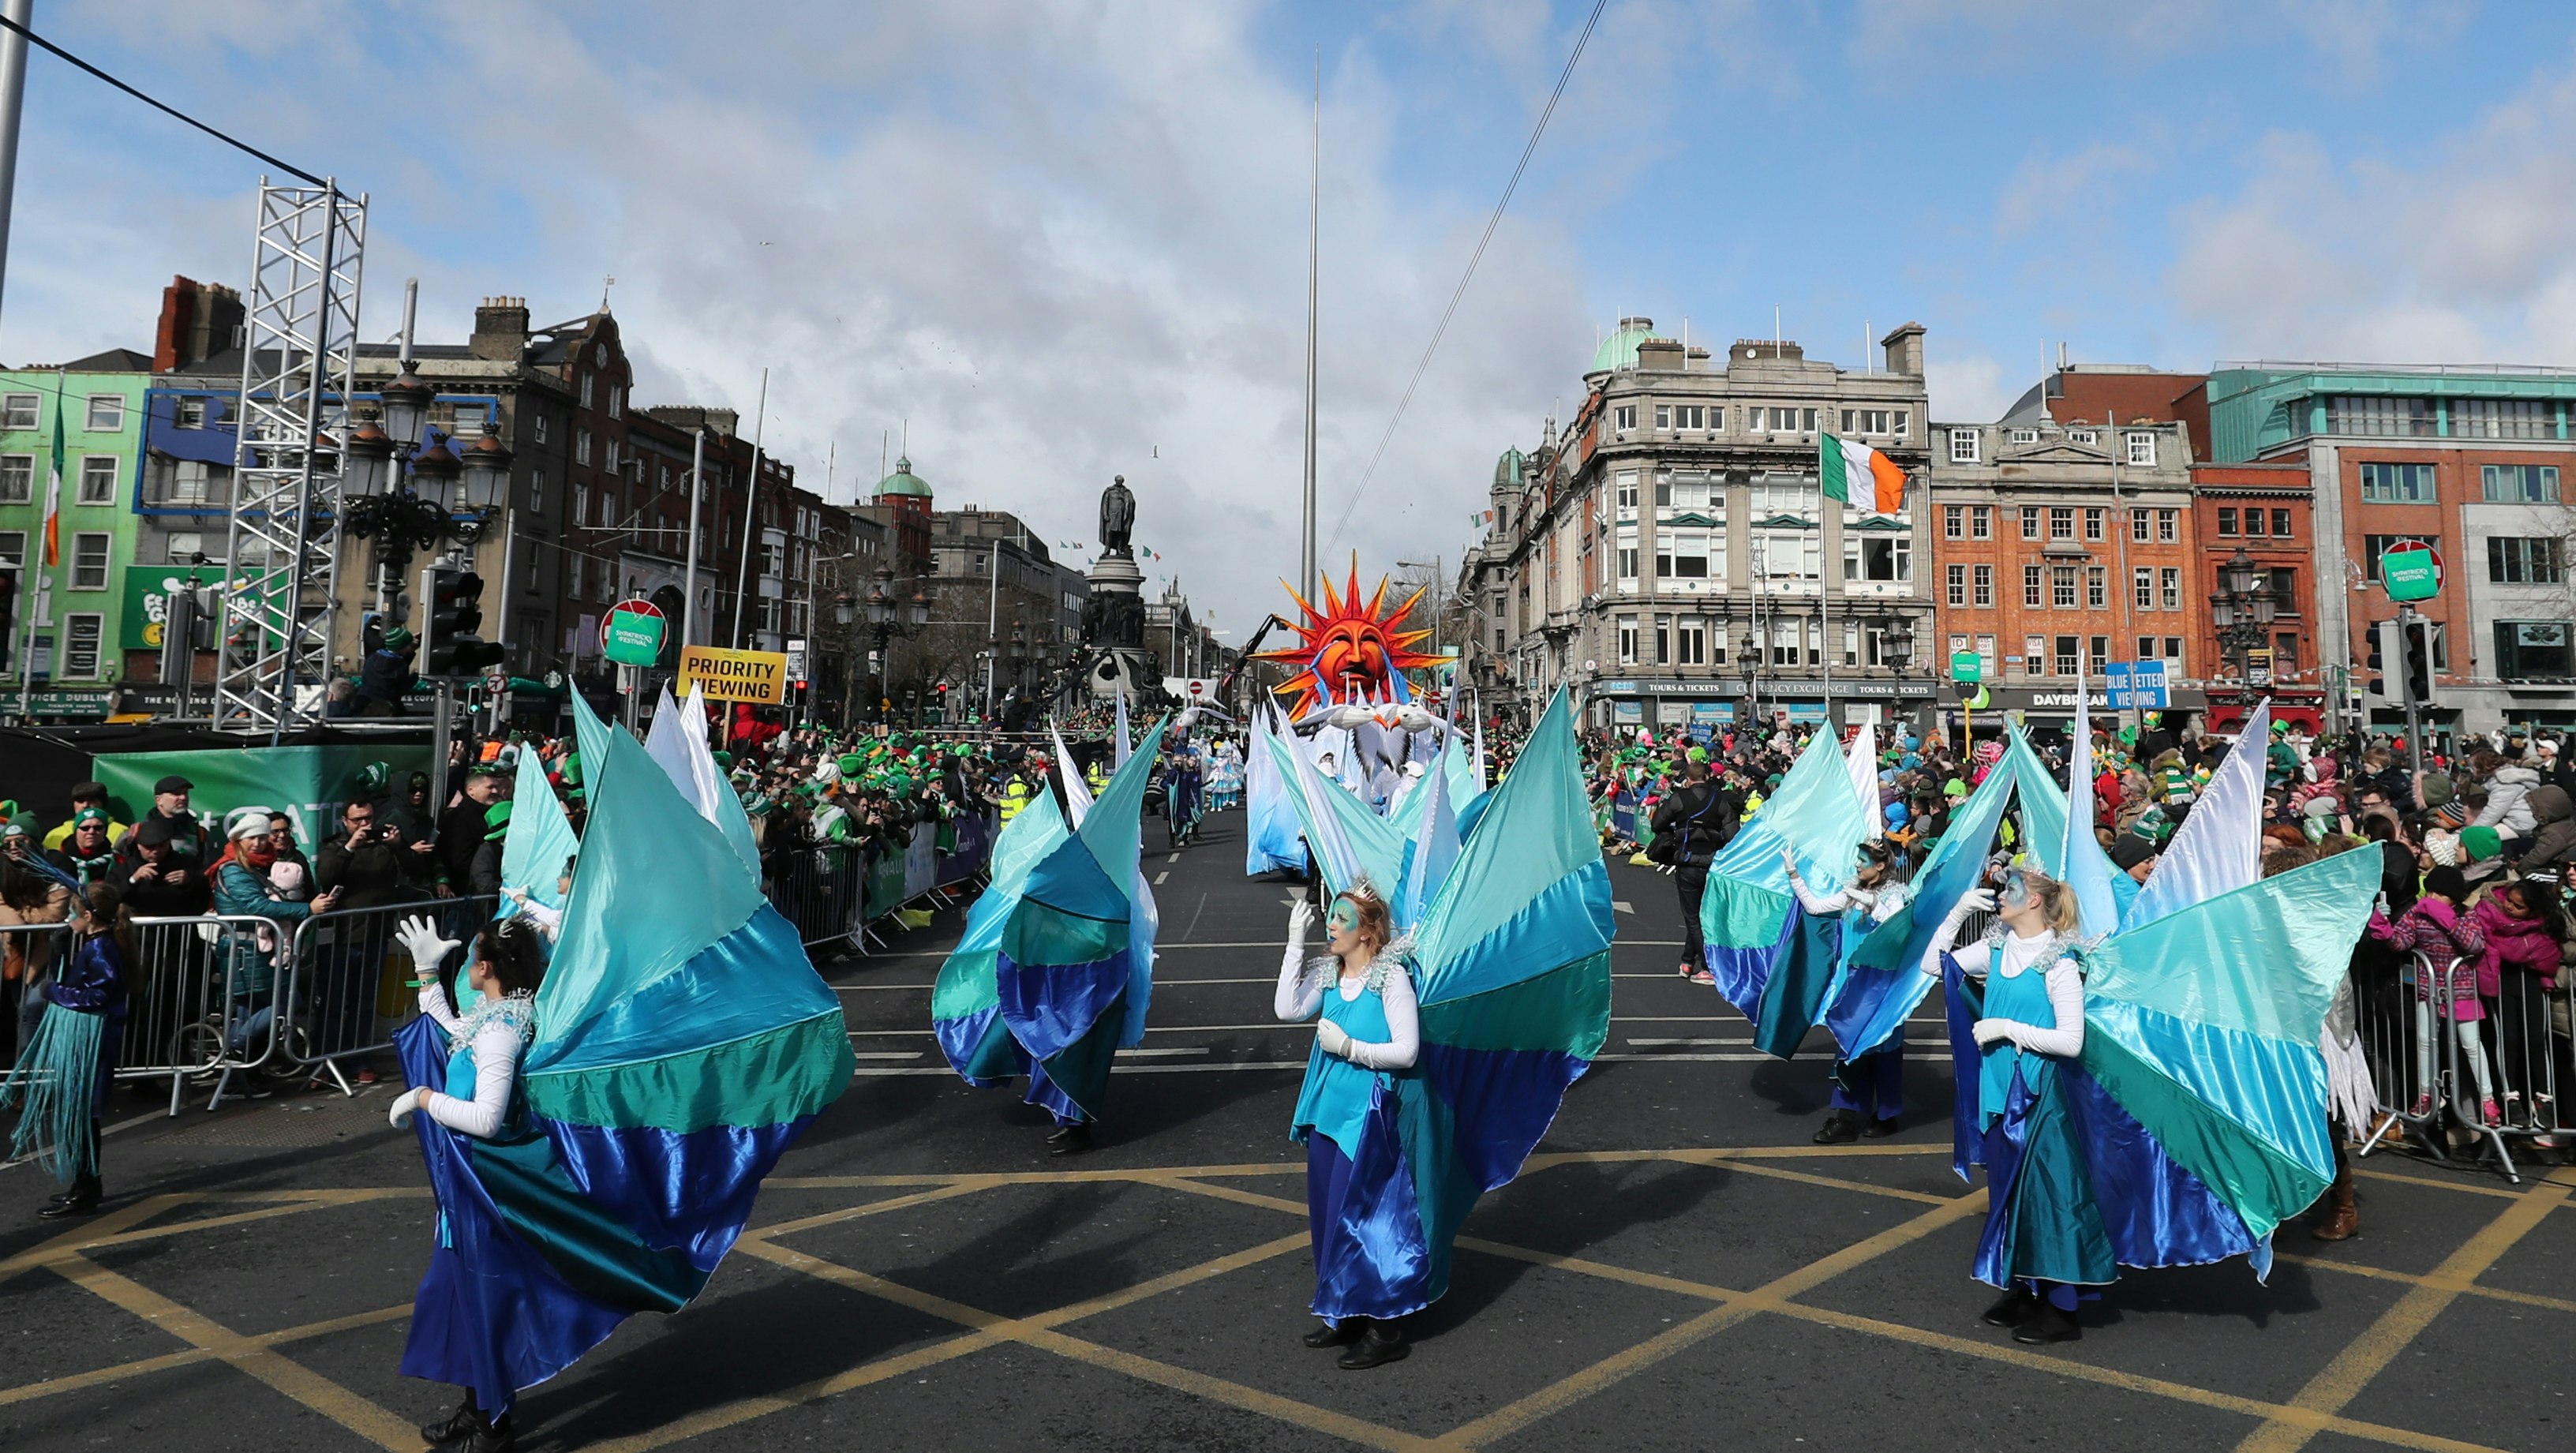 St Patrick's Day Celebration parade in the streets, O'Connell Bridge, Dublin. 